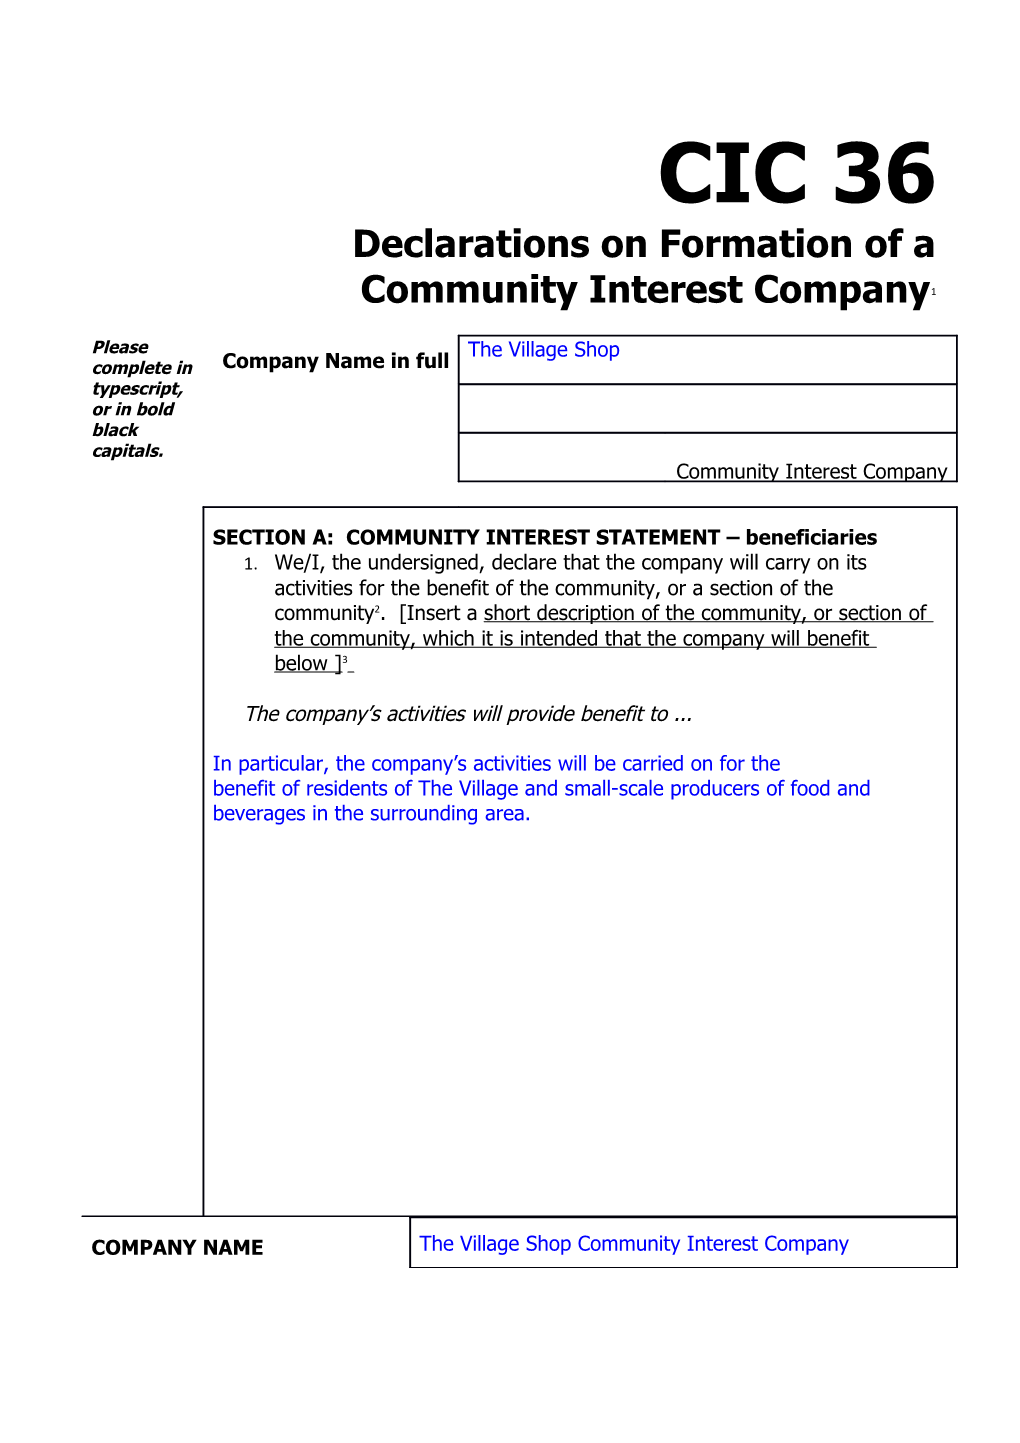 Declarations on Formation of a Community Interest Company 1